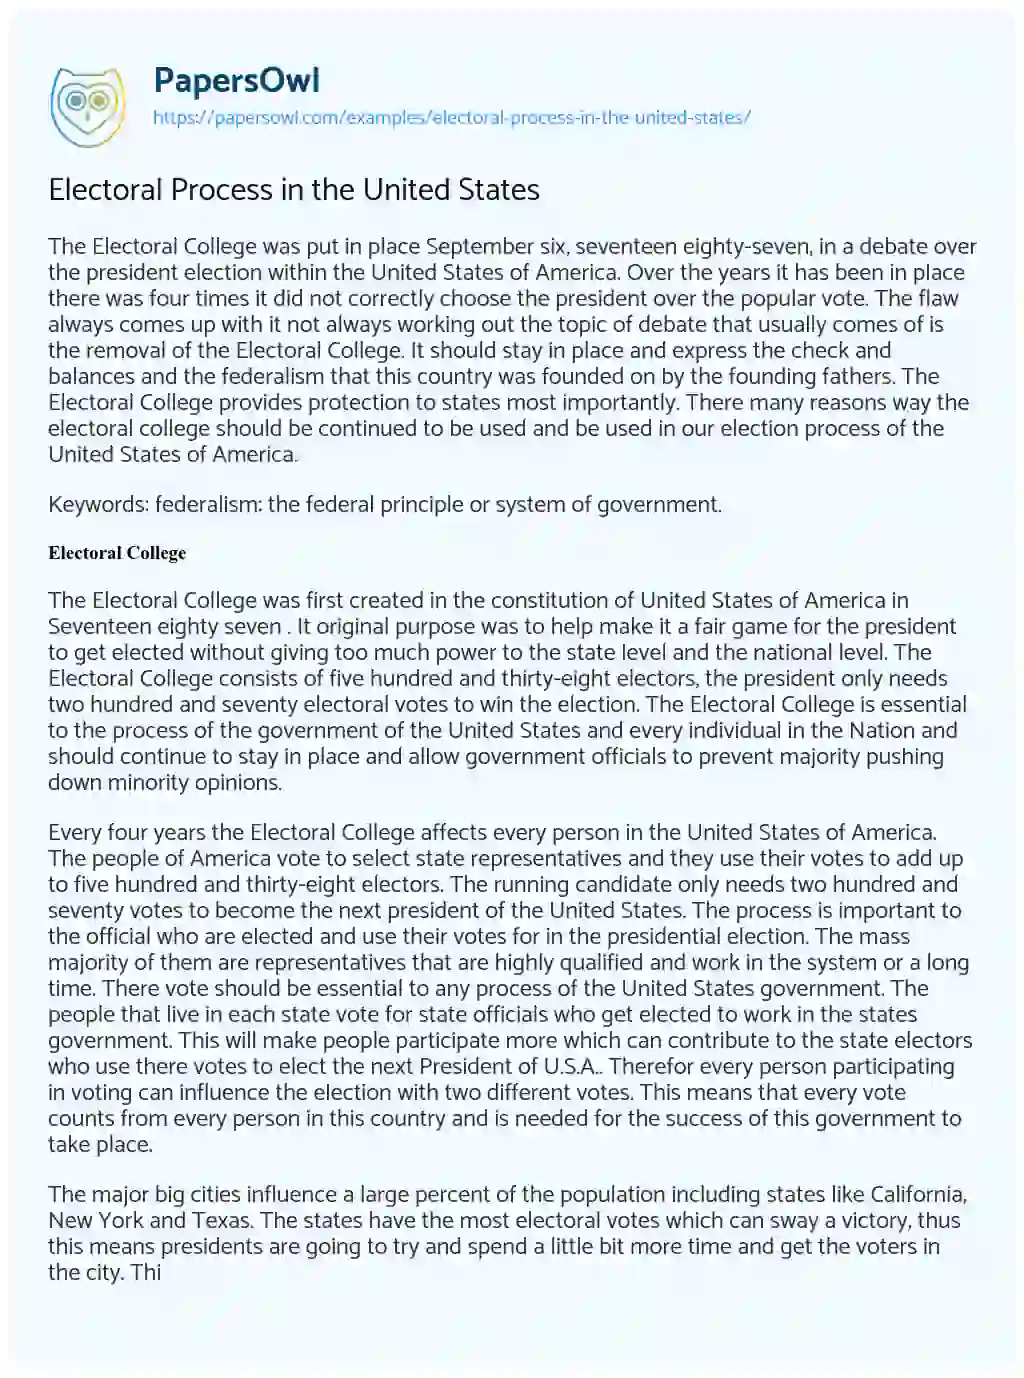 Essay on Electoral Process in the United States